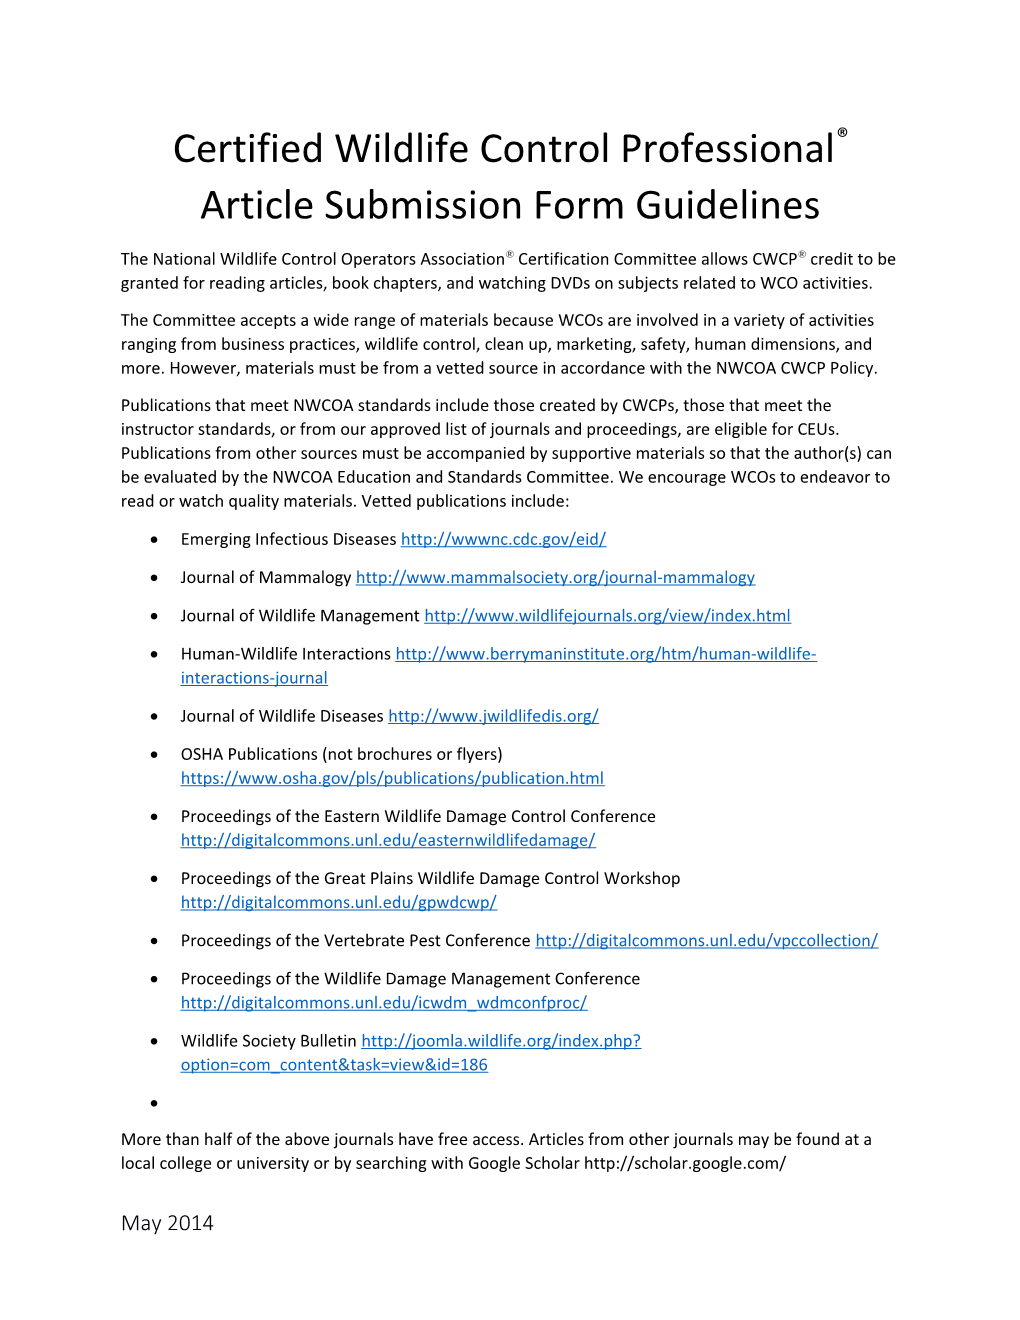 Certified Wildlife Control Professional Article Submission Form Guidelines